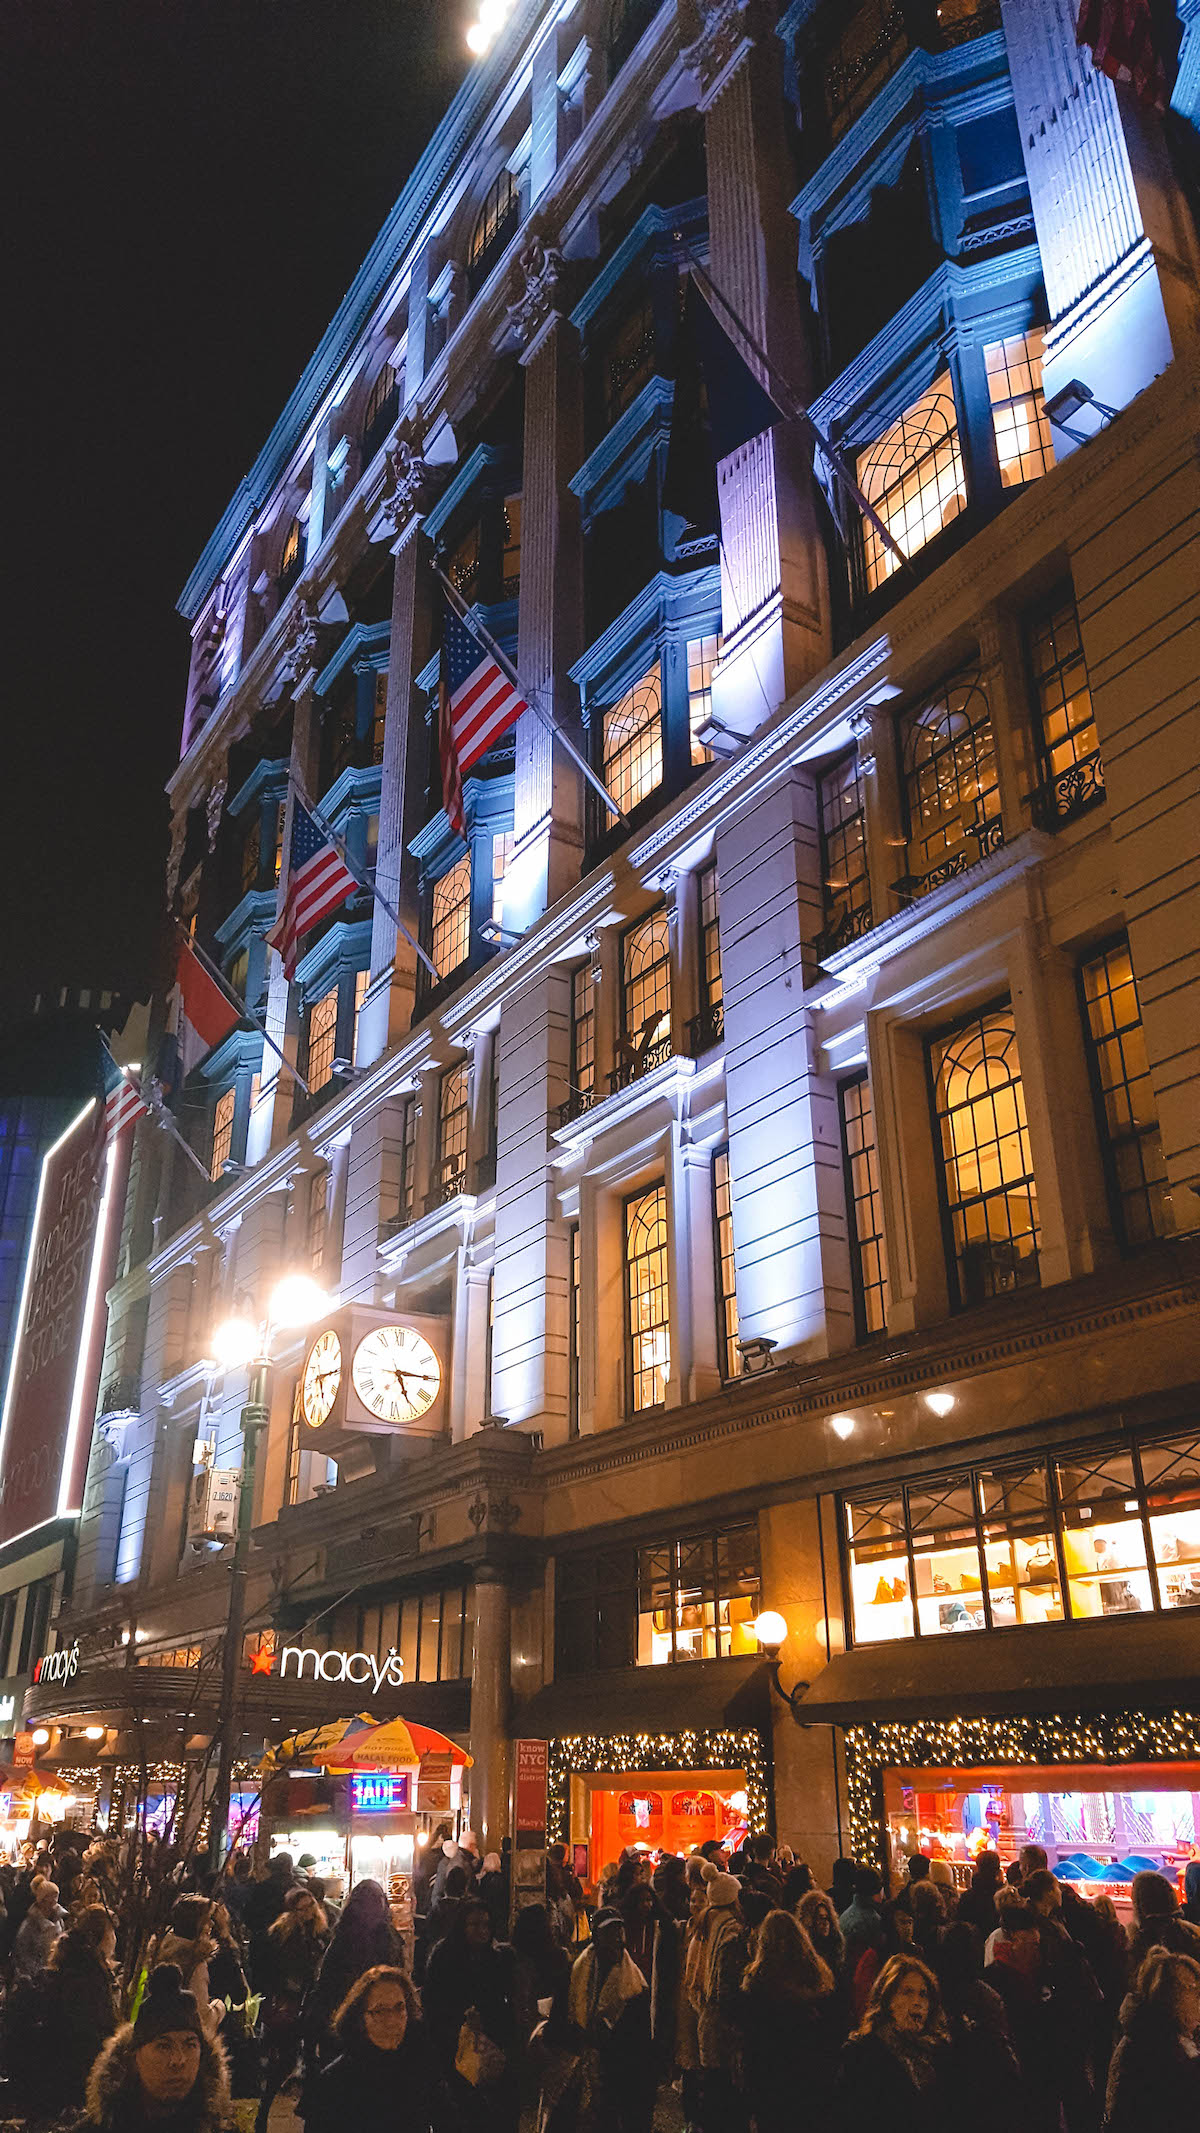 The Macy's building in NYC, at night